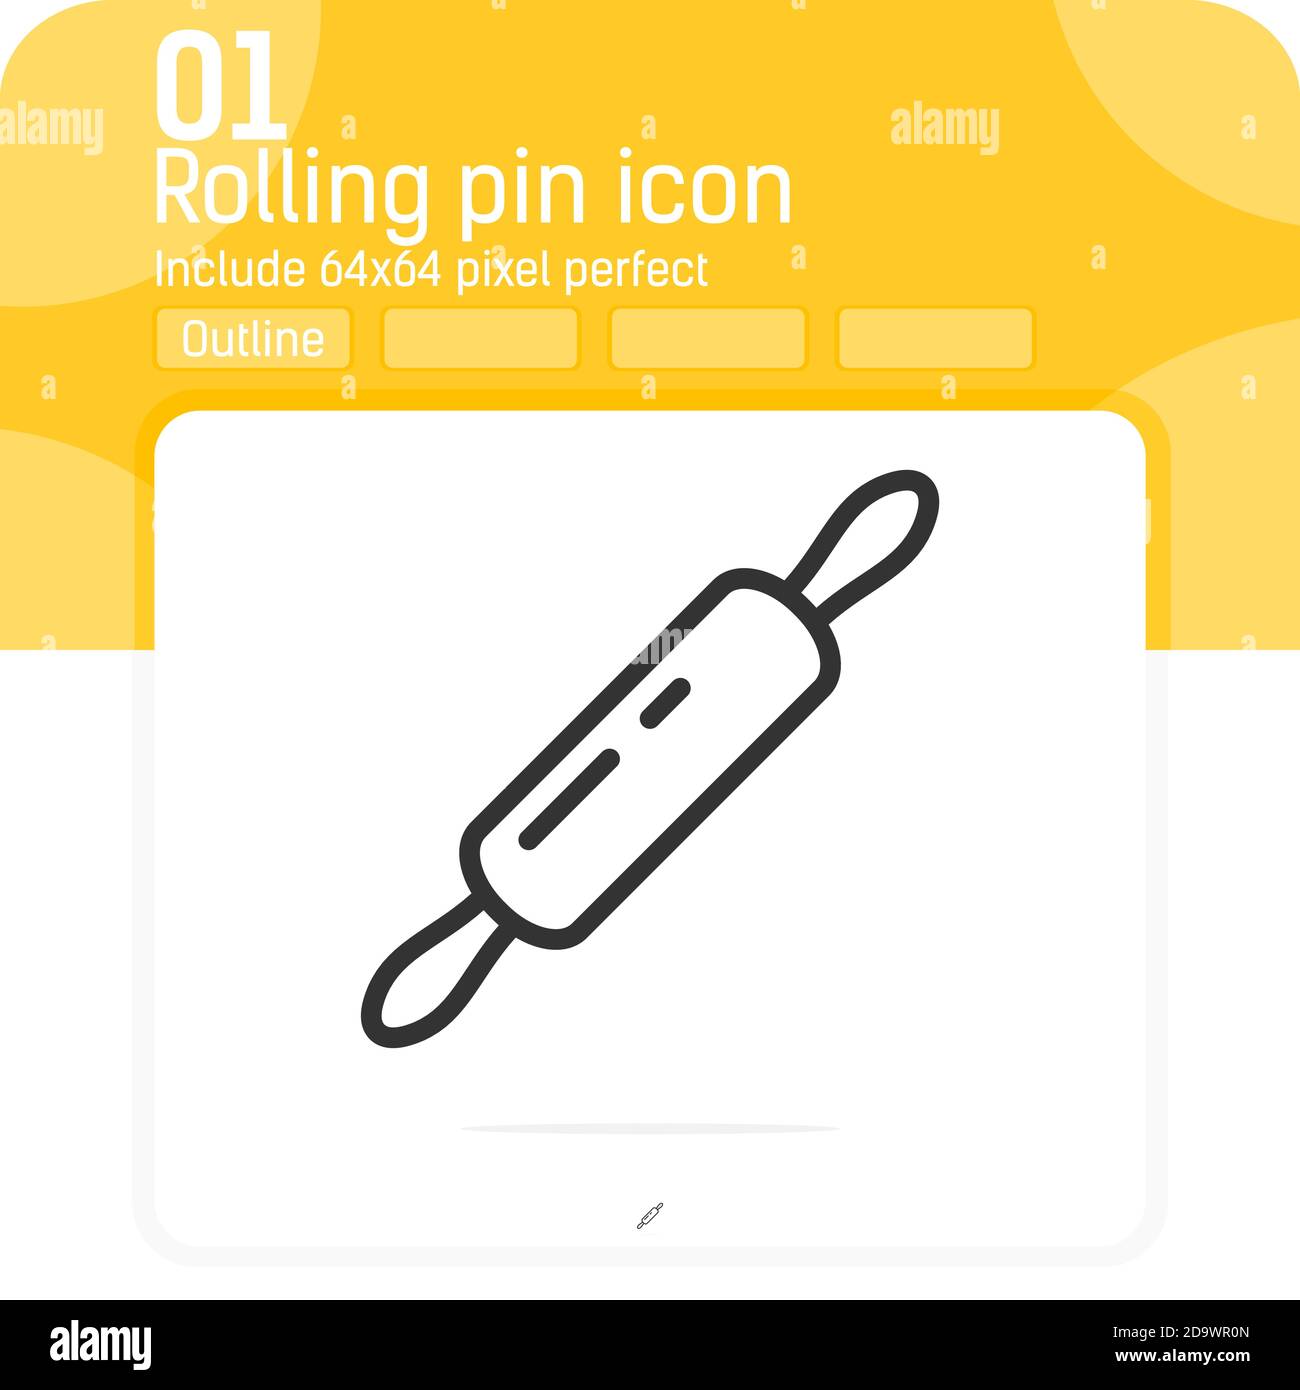 Rolling pin premium icon with outline style isolated on white background. Line vector illustration sign symbol pixel aligned icon concept for web Stock Vector